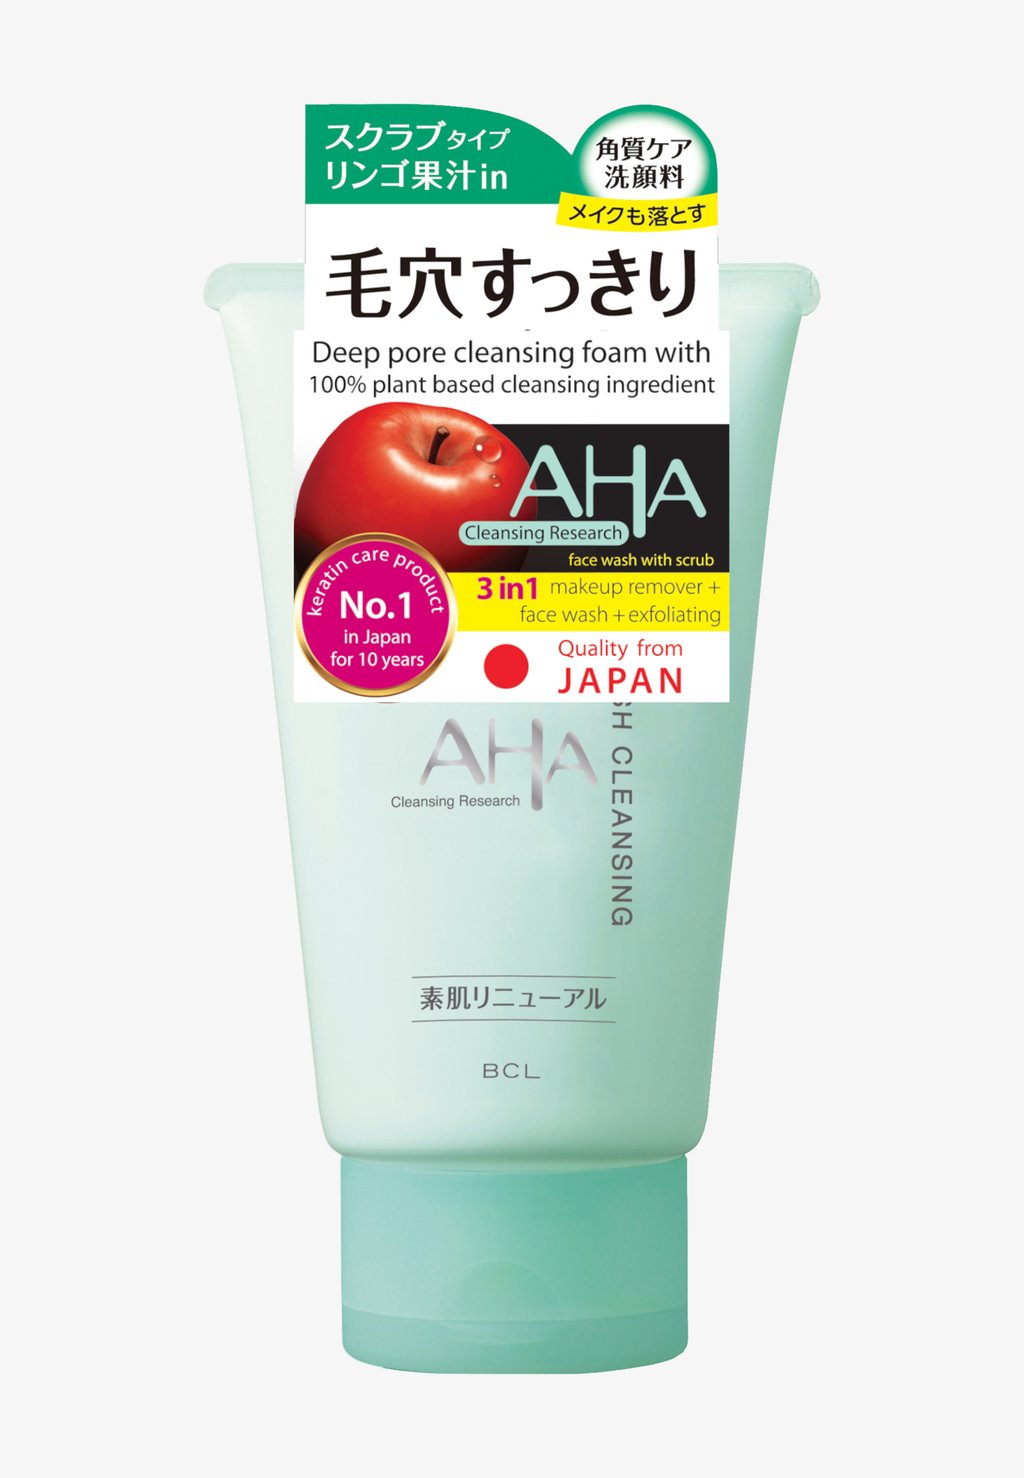 Скраб-пилинг для лица Aha Cleansing Research Wash Cleansing And (Scrubbing) AHA Cleansing Research